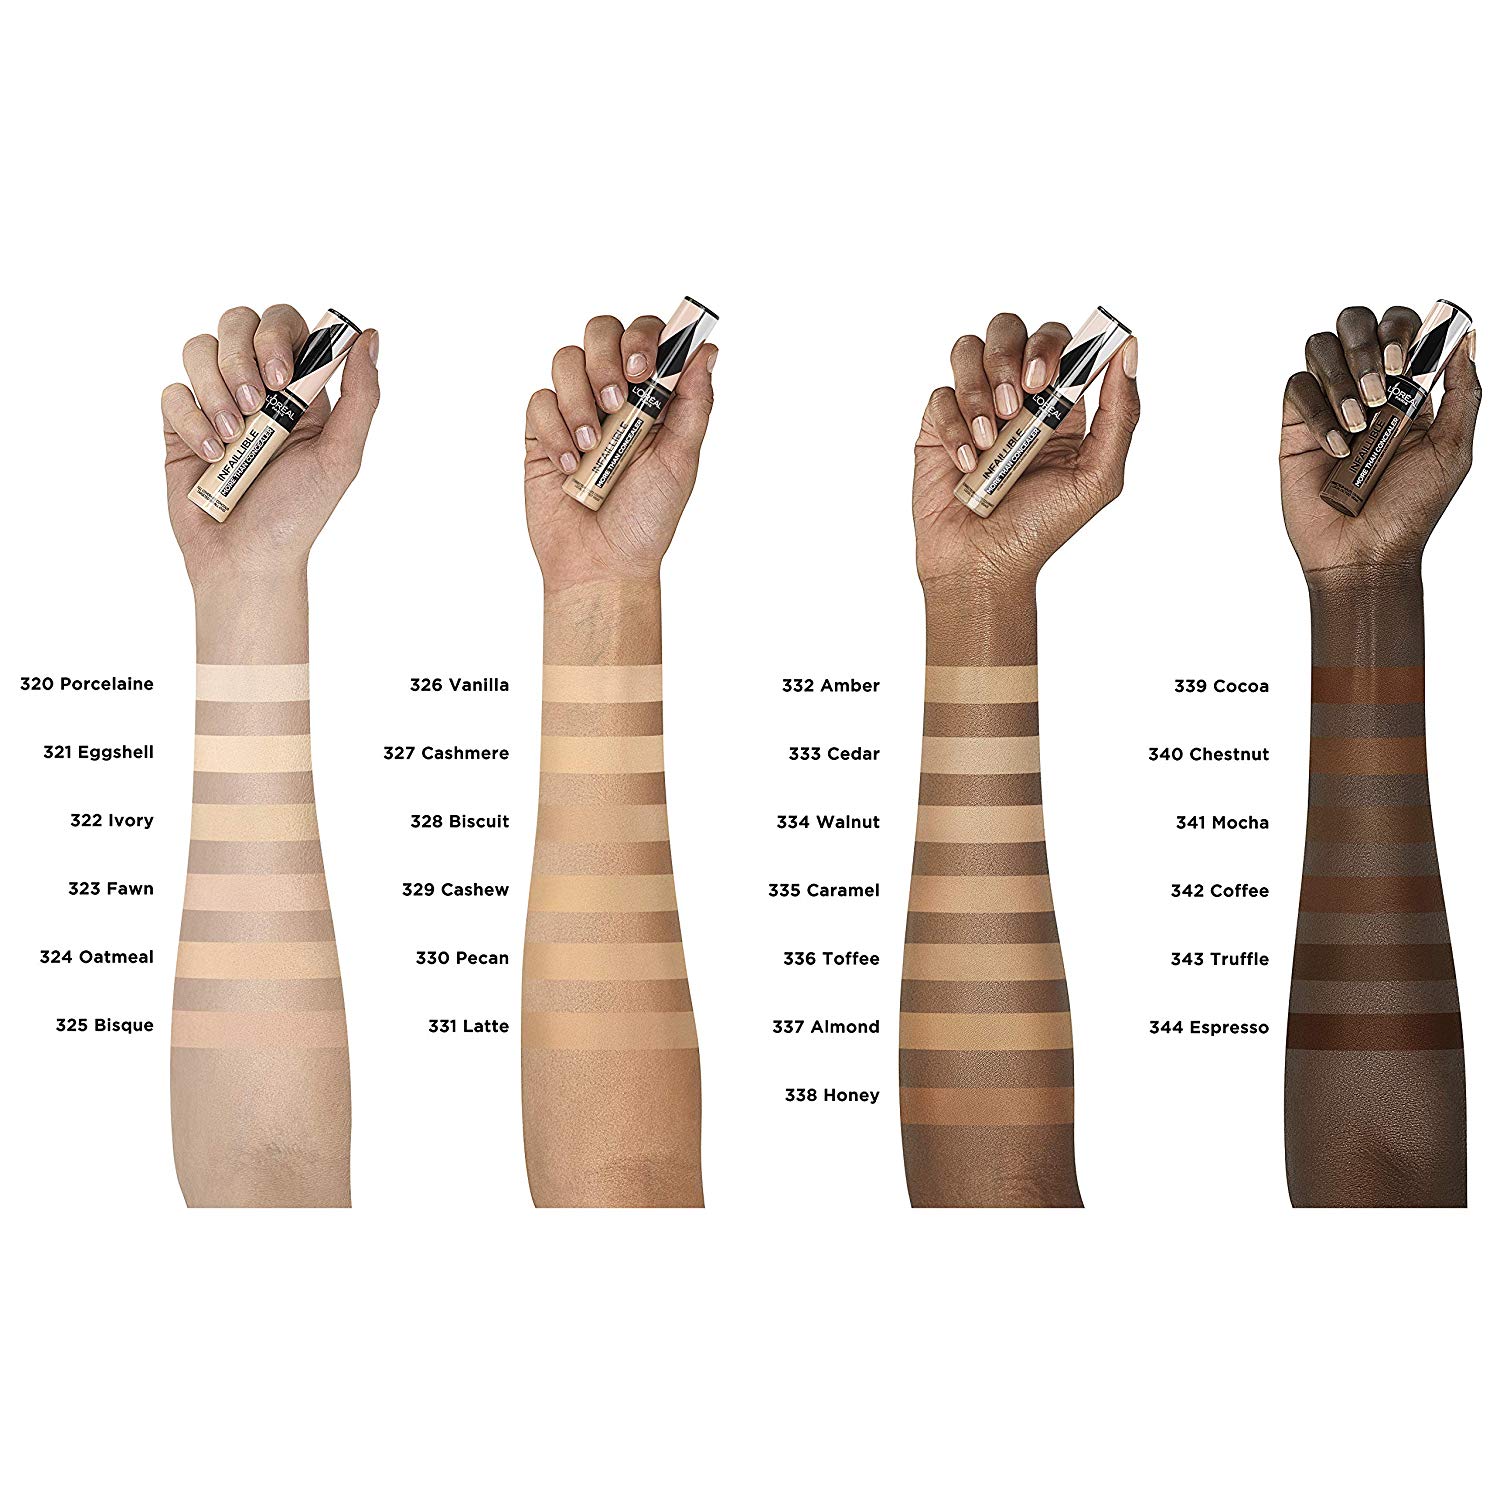 LOREAL PARIS Infaillible More Than Concealer Swatches Colors